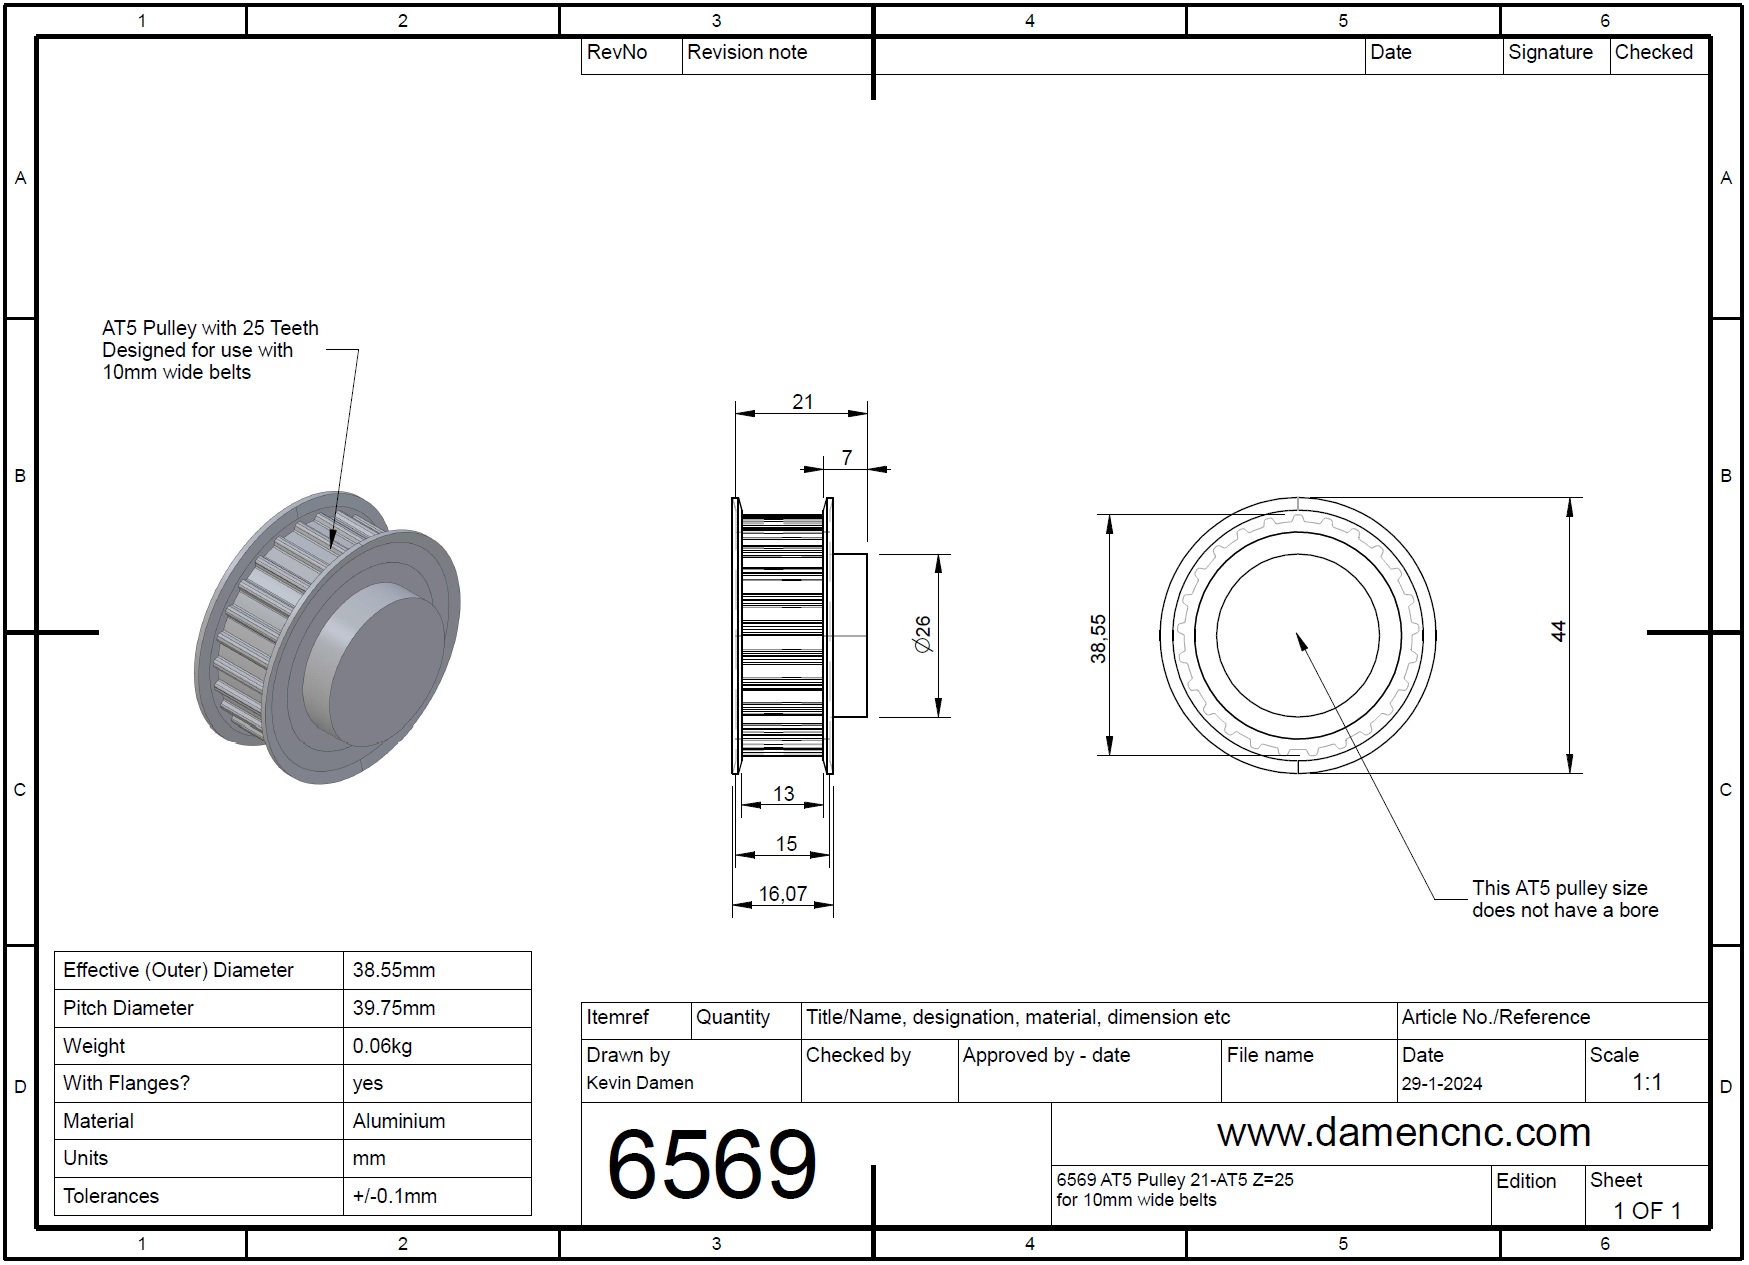 65692 at5 pulley 21at5 z25 for 10mm wide belts 2d dimensions